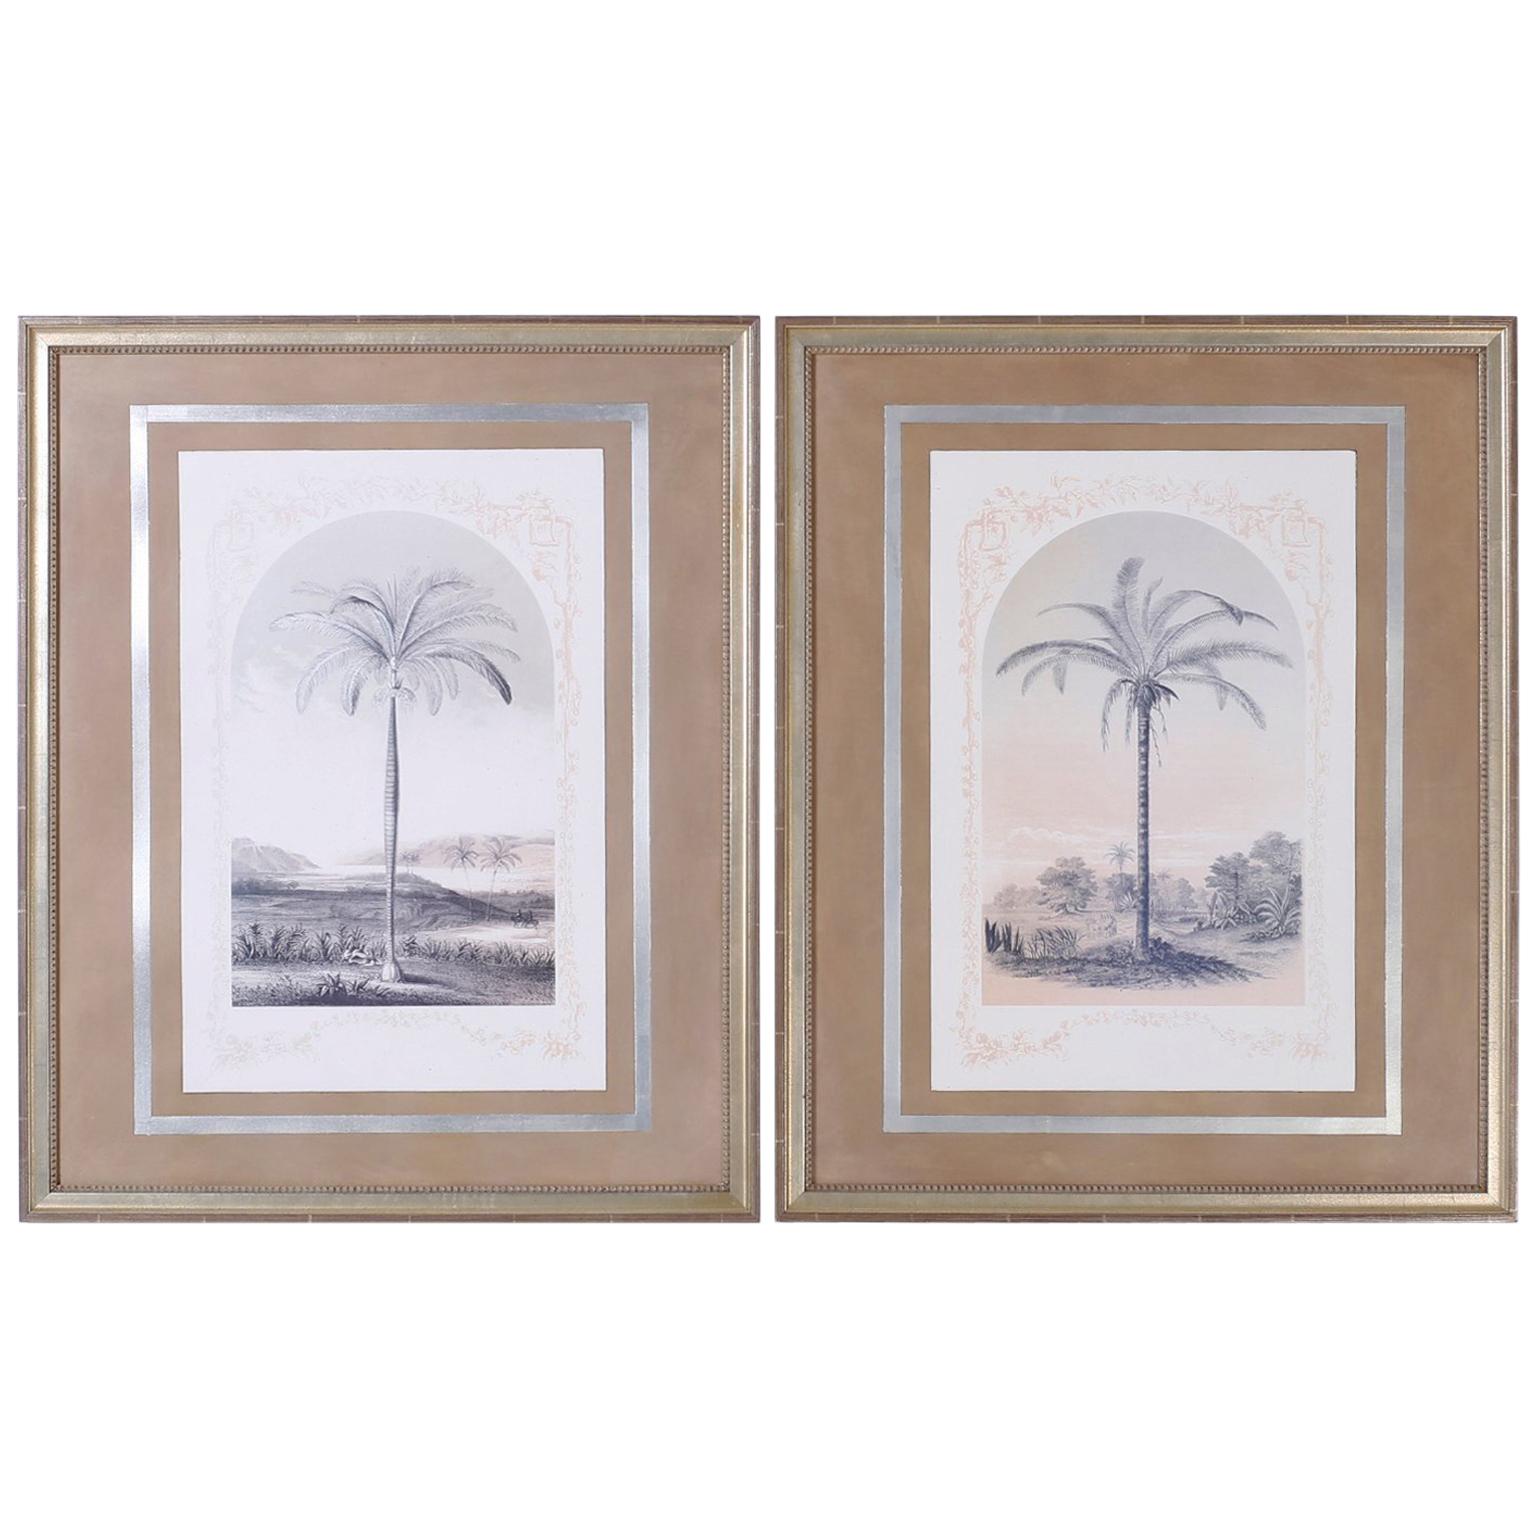 Pair of Framed and Matted Palm Tree Lithographs